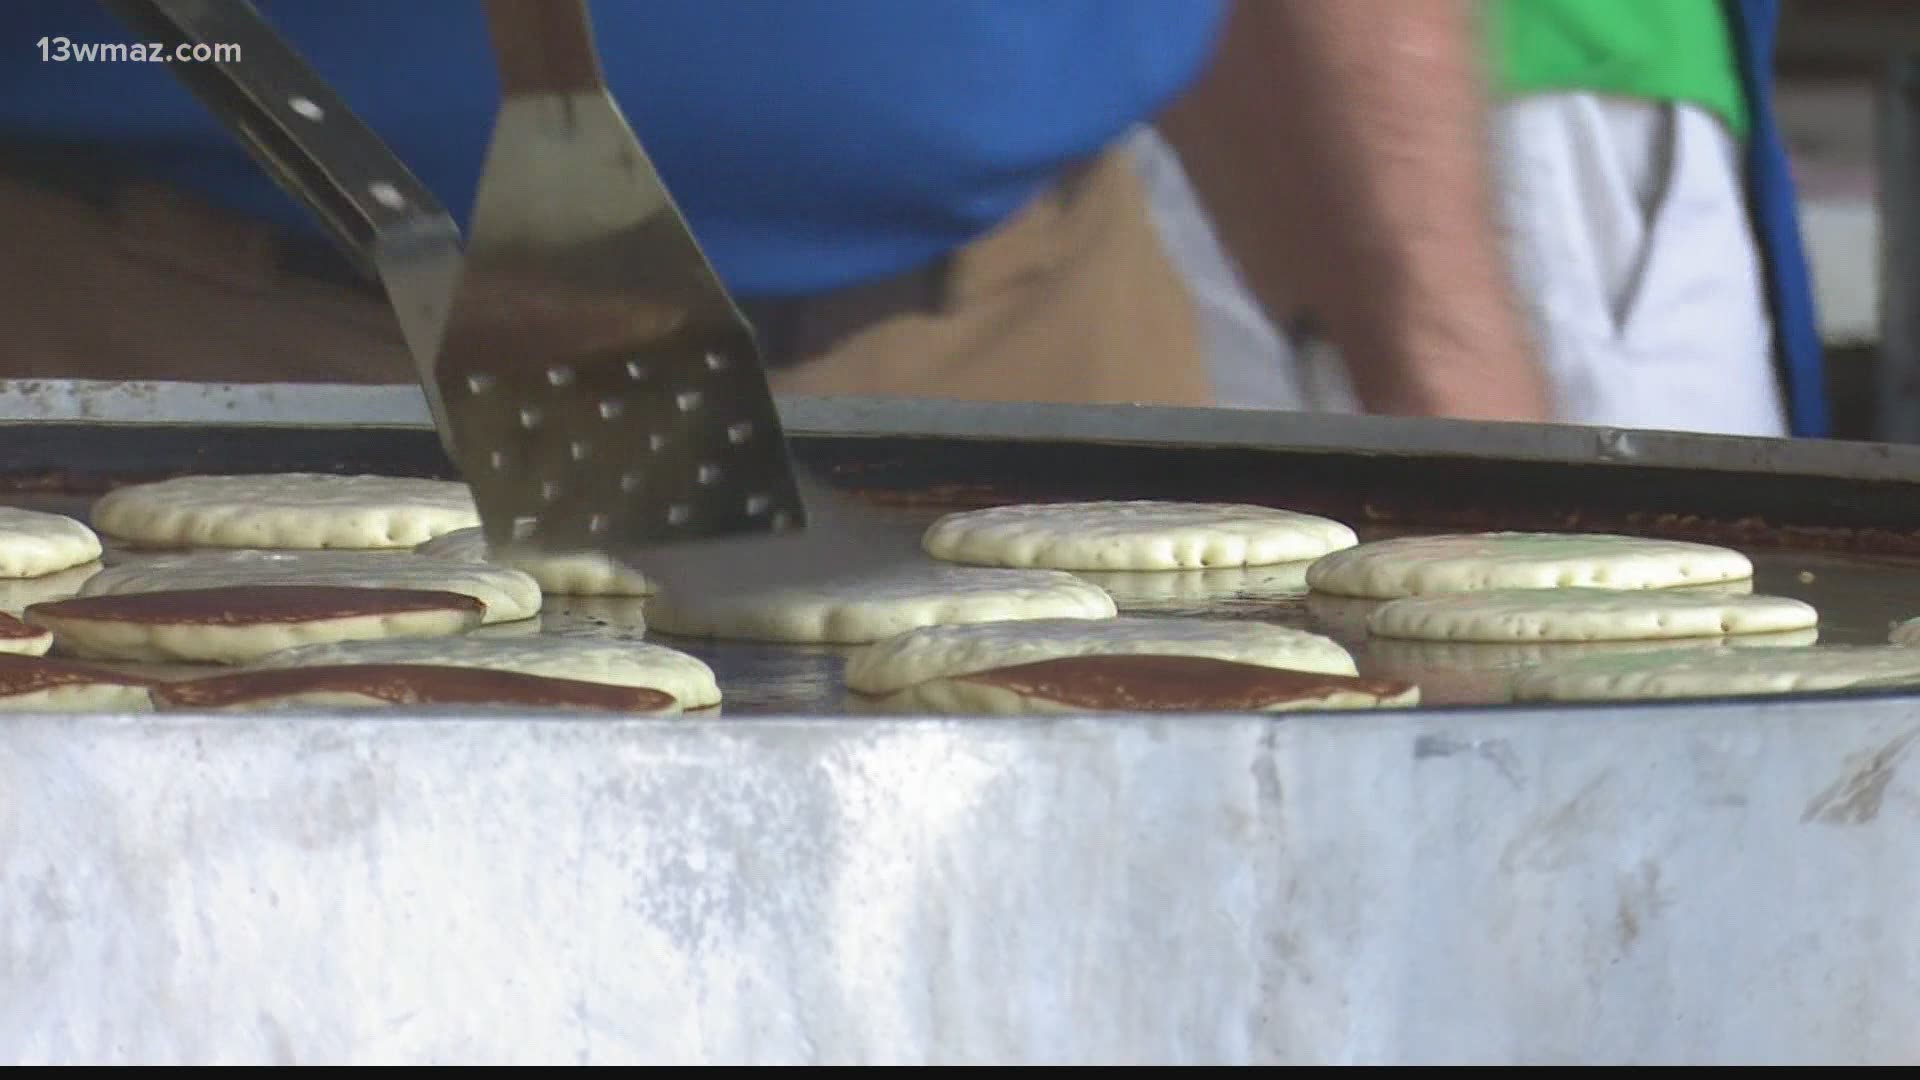 The Dublin Exchange Club held their previously-rescheduled Pancake Supper Thursday night.